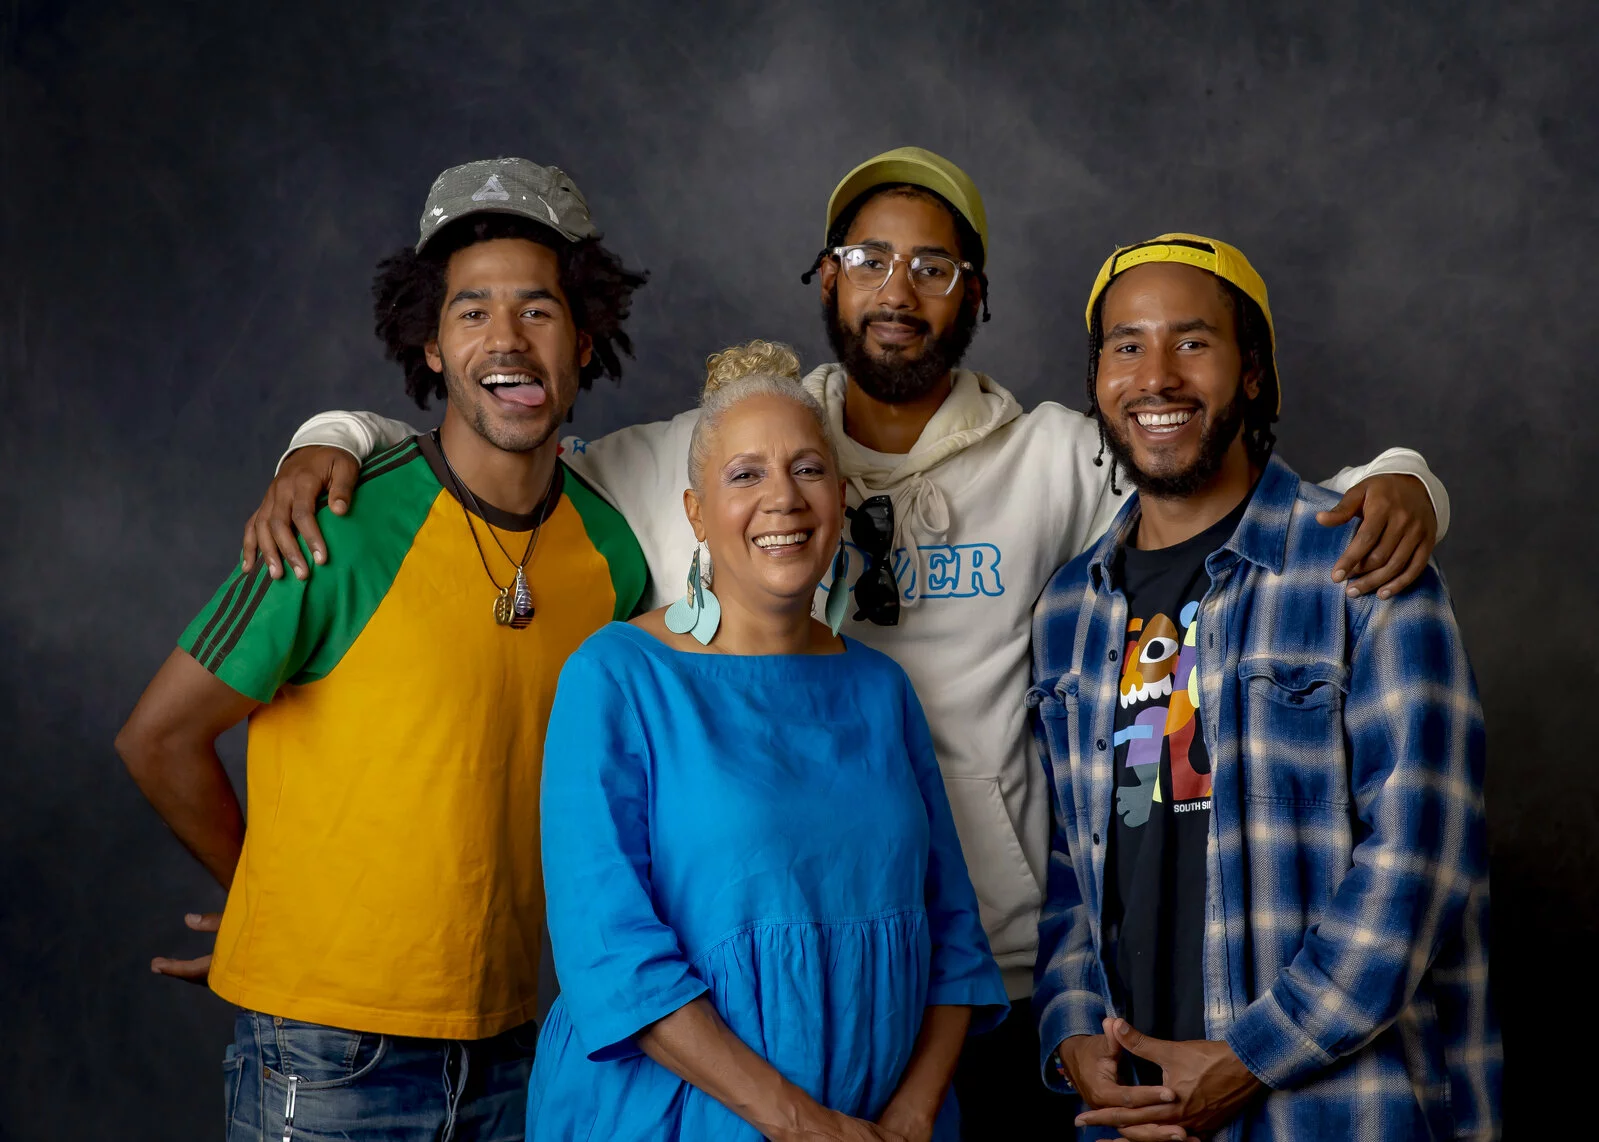 A group portrait of a woman surrounded by three younger men against a gray backdrop.